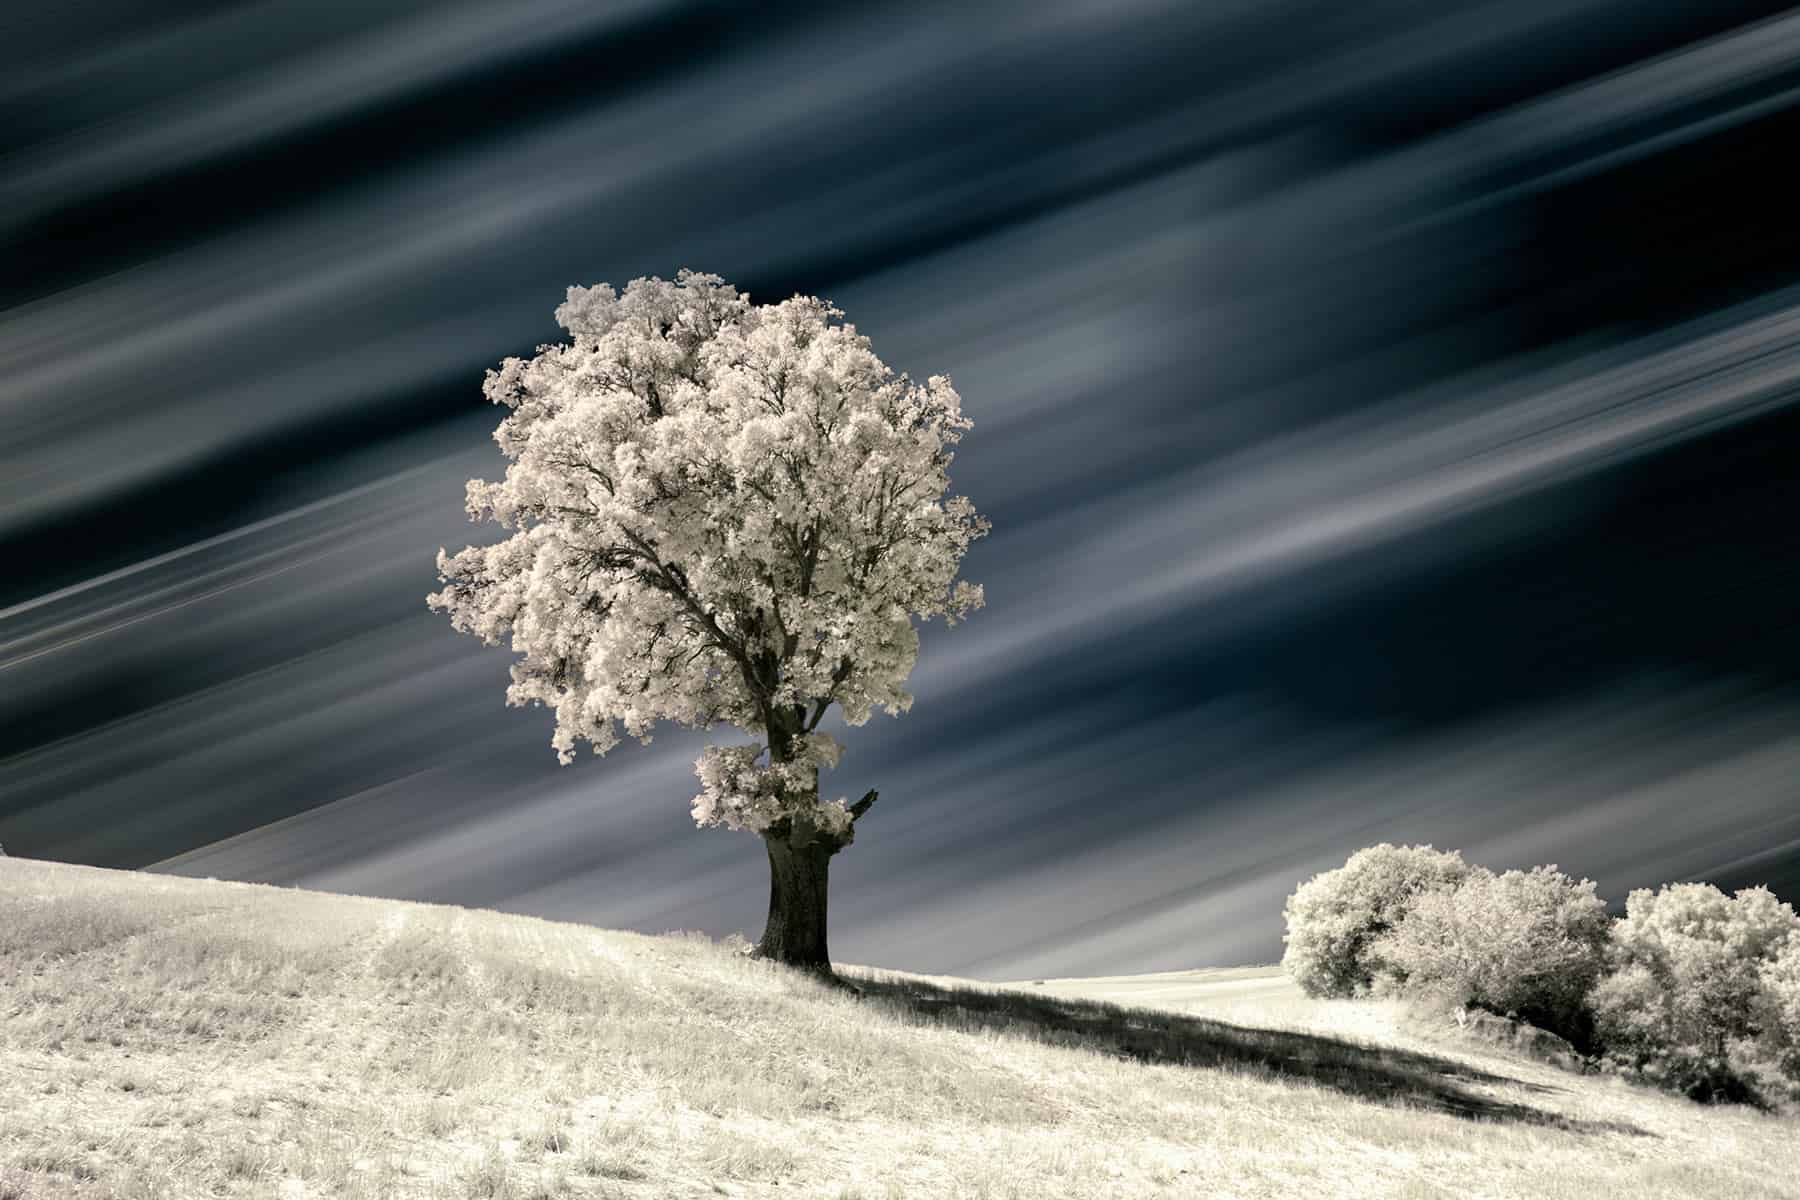 Learn How To Take Infrared Photography | Student Resources